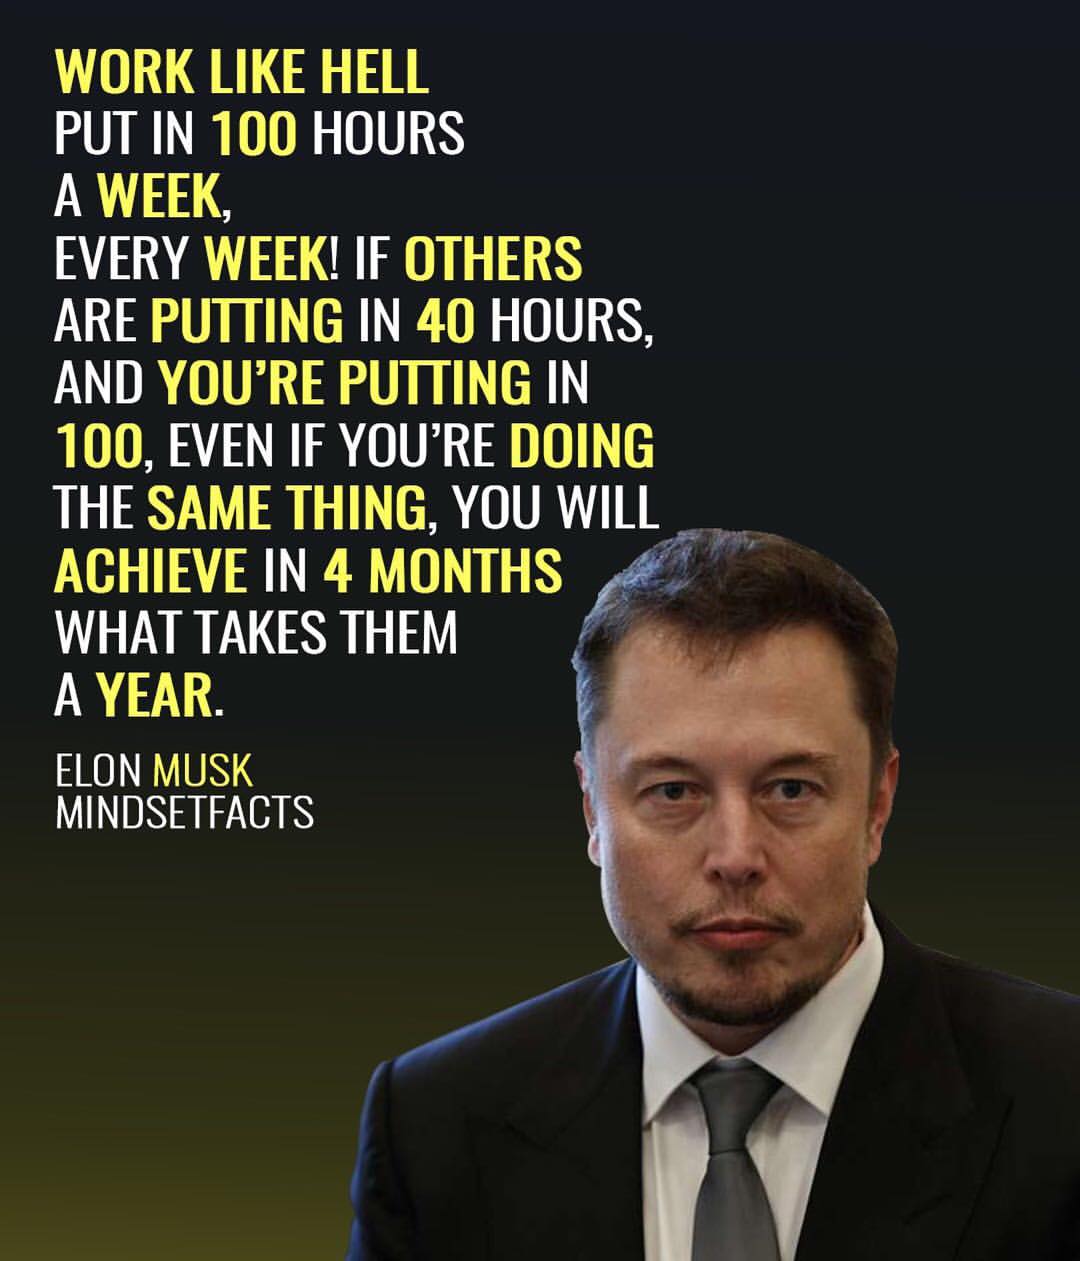 Elon Musk Quotes Wallpapers - Top Free Elon Musk Quotes Backgrounds